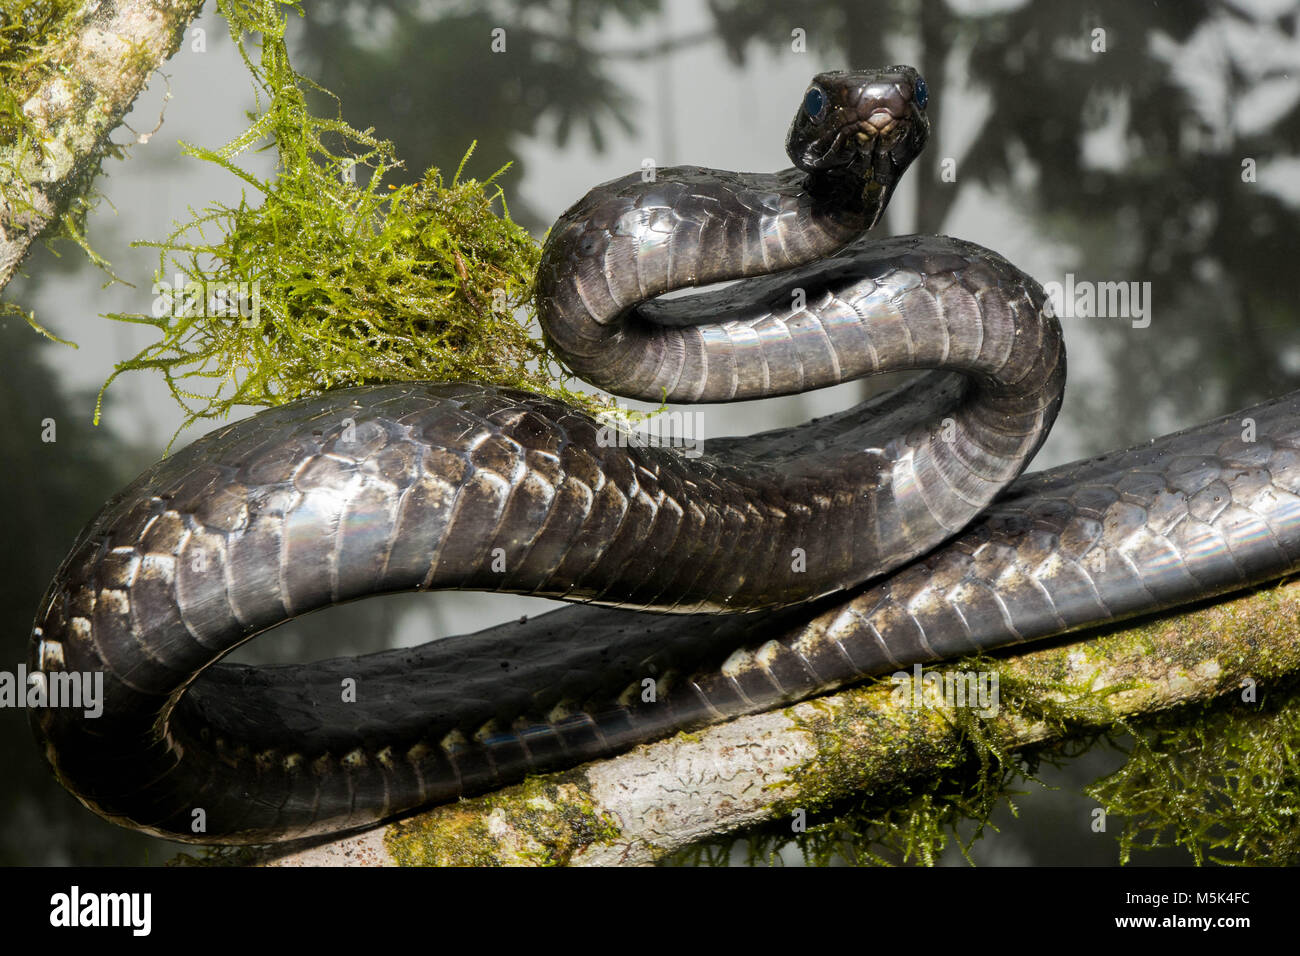 A large Sipo (Chironius grandisquamis) a species of snake from SOuth America, is alert and defensive. Stock Photo